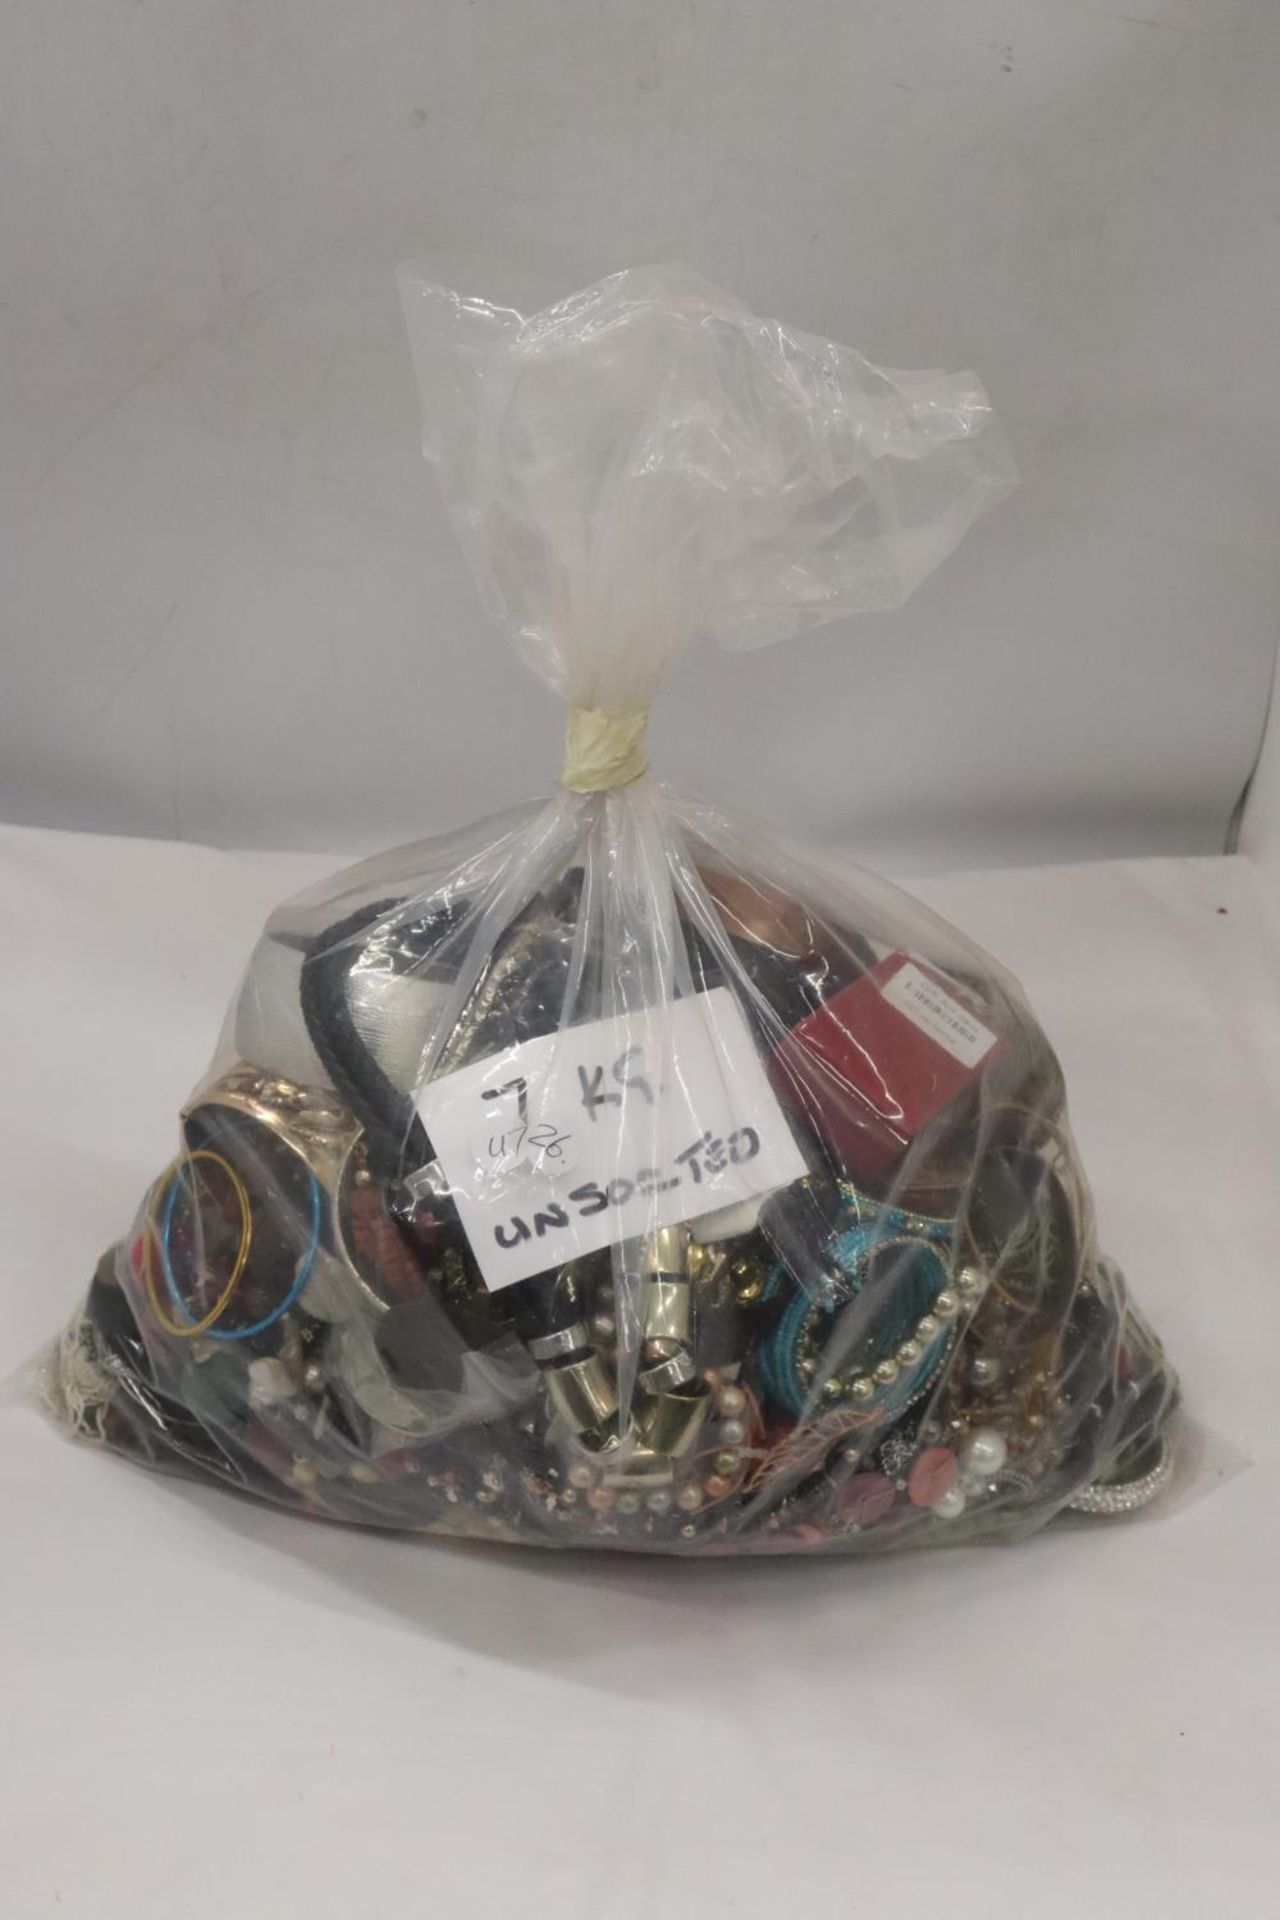 A LARGE QUANTITY OF UNSORTED COSTUME JEWELLERY - 7 KG IN TOTAL